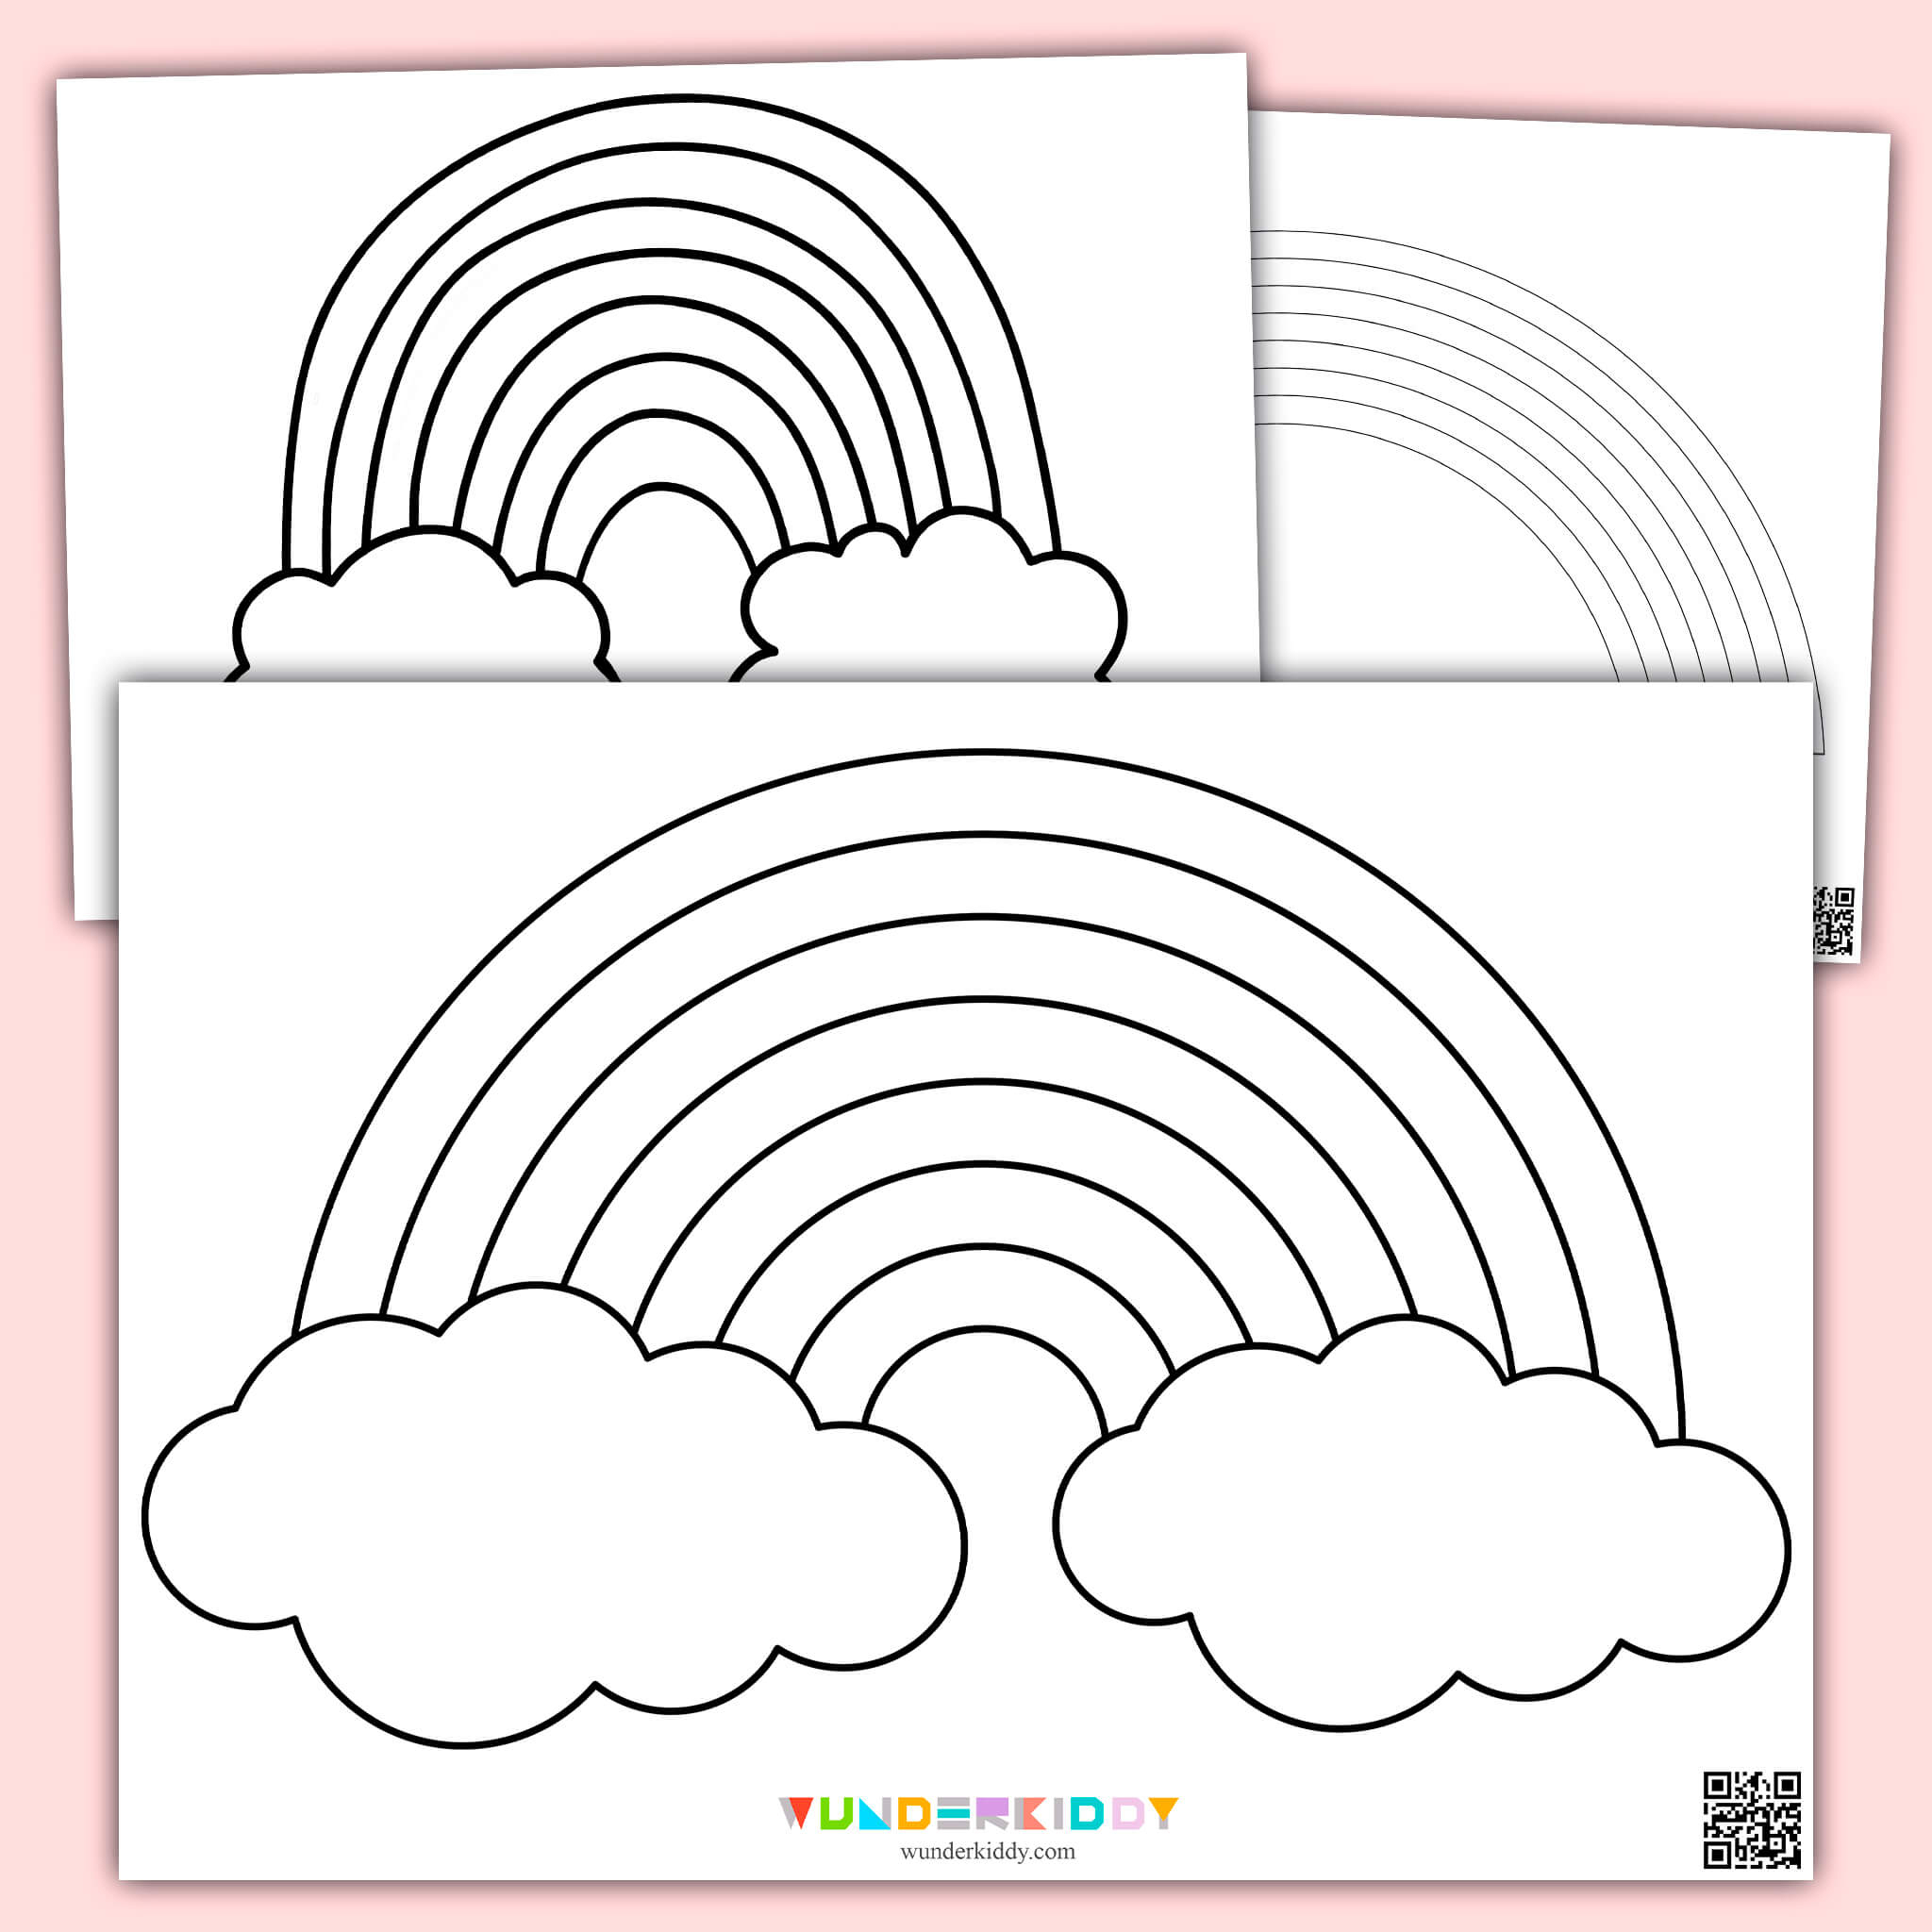 Free Printable Rainbow Template For Craft In Kindergarten - Free Printable Rainbow Stencils